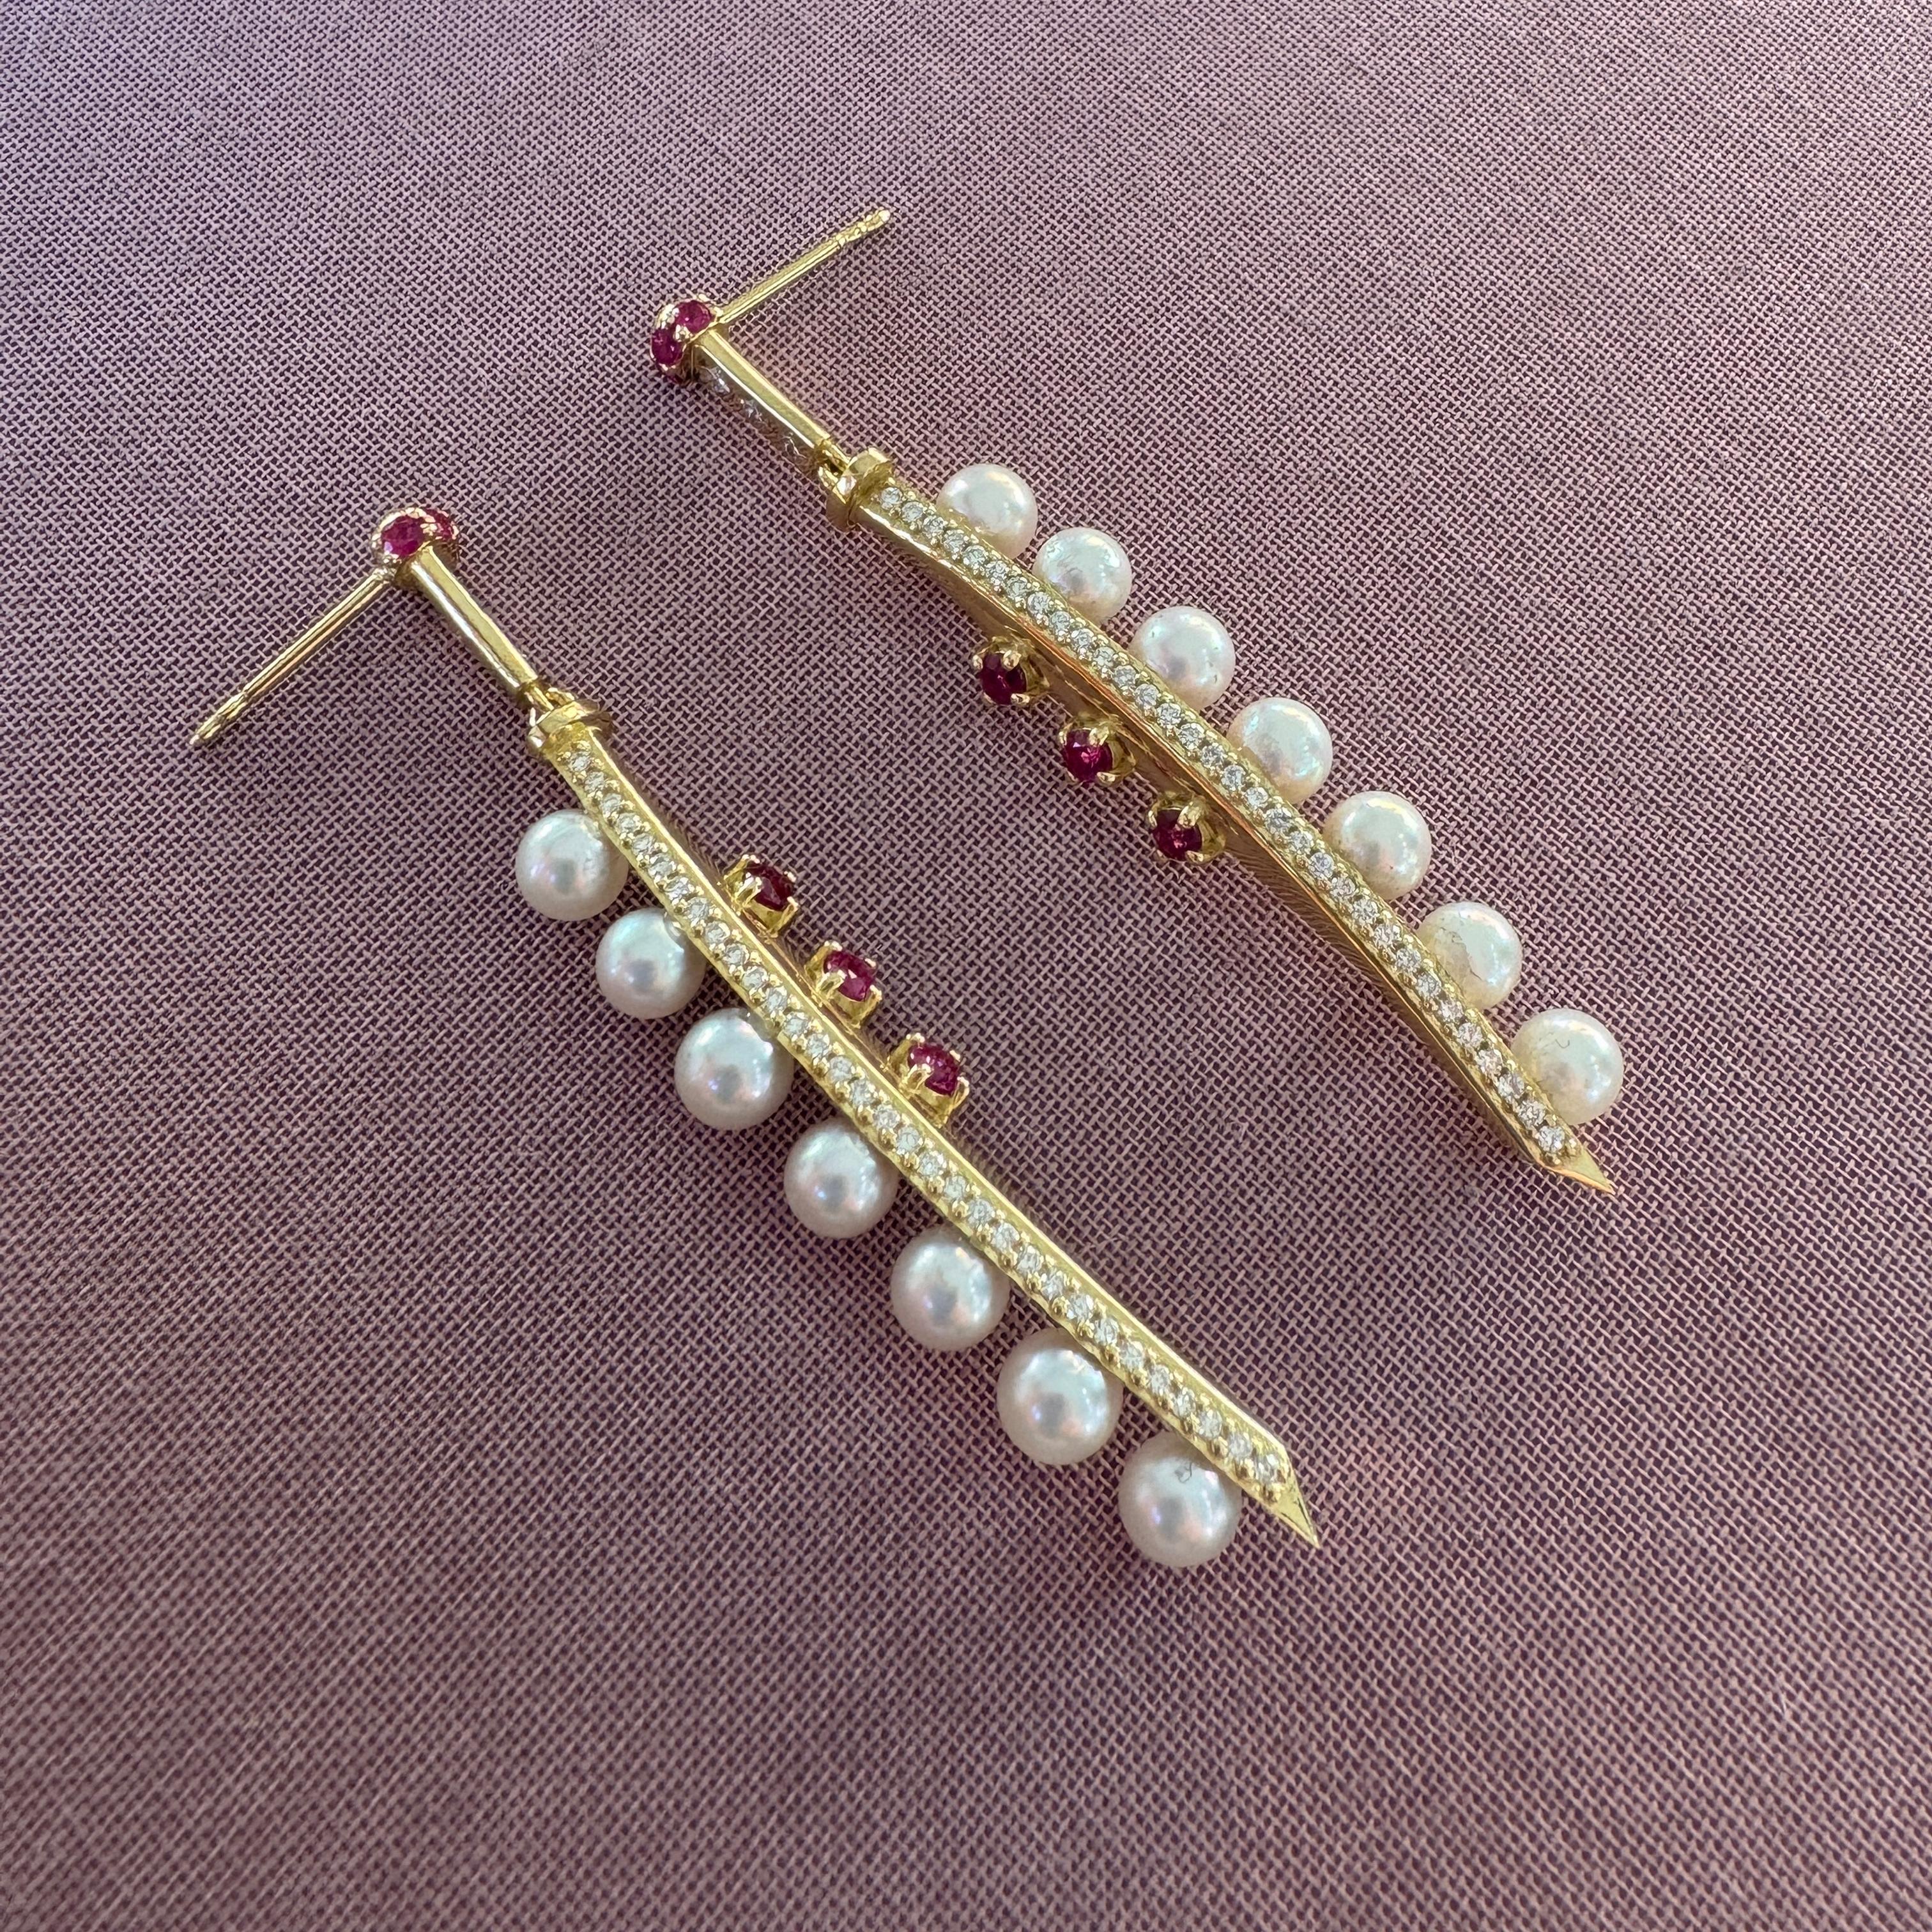 Contemporary Onna Musha Earrings in 18 Karat Yellow Gold with Diamonds, Rubies And Pearls